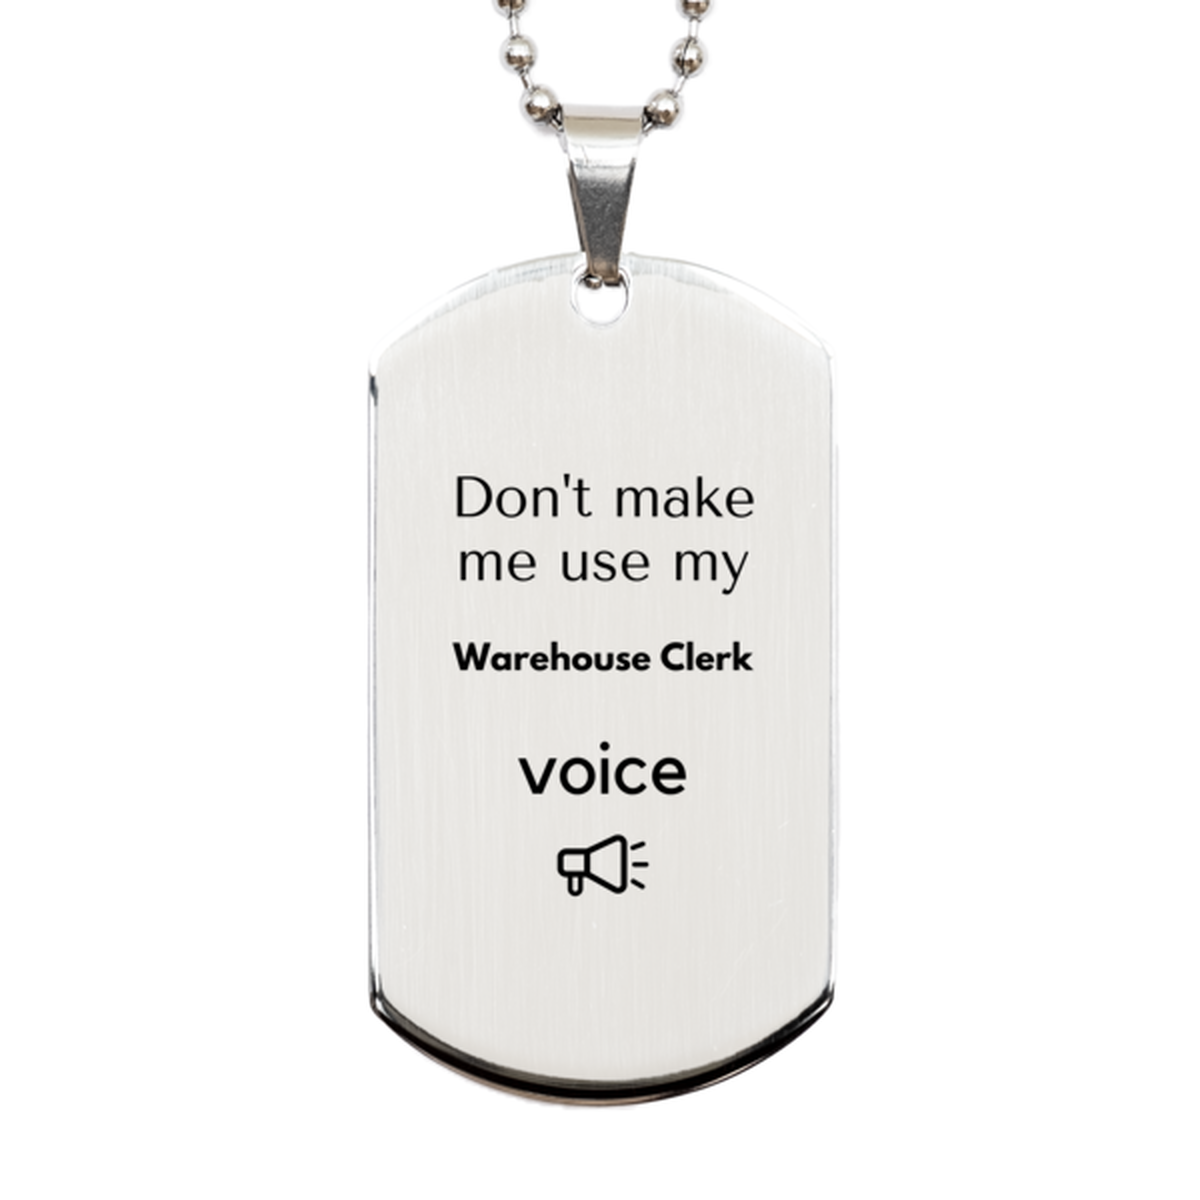 Don't make me use my Warehouse Clerk voice, Sarcasm Warehouse Clerk Gifts, Christmas Warehouse Clerk Silver Dog Tag Birthday Unique Gifts For Warehouse Clerk Coworkers, Men, Women, Colleague, Friends